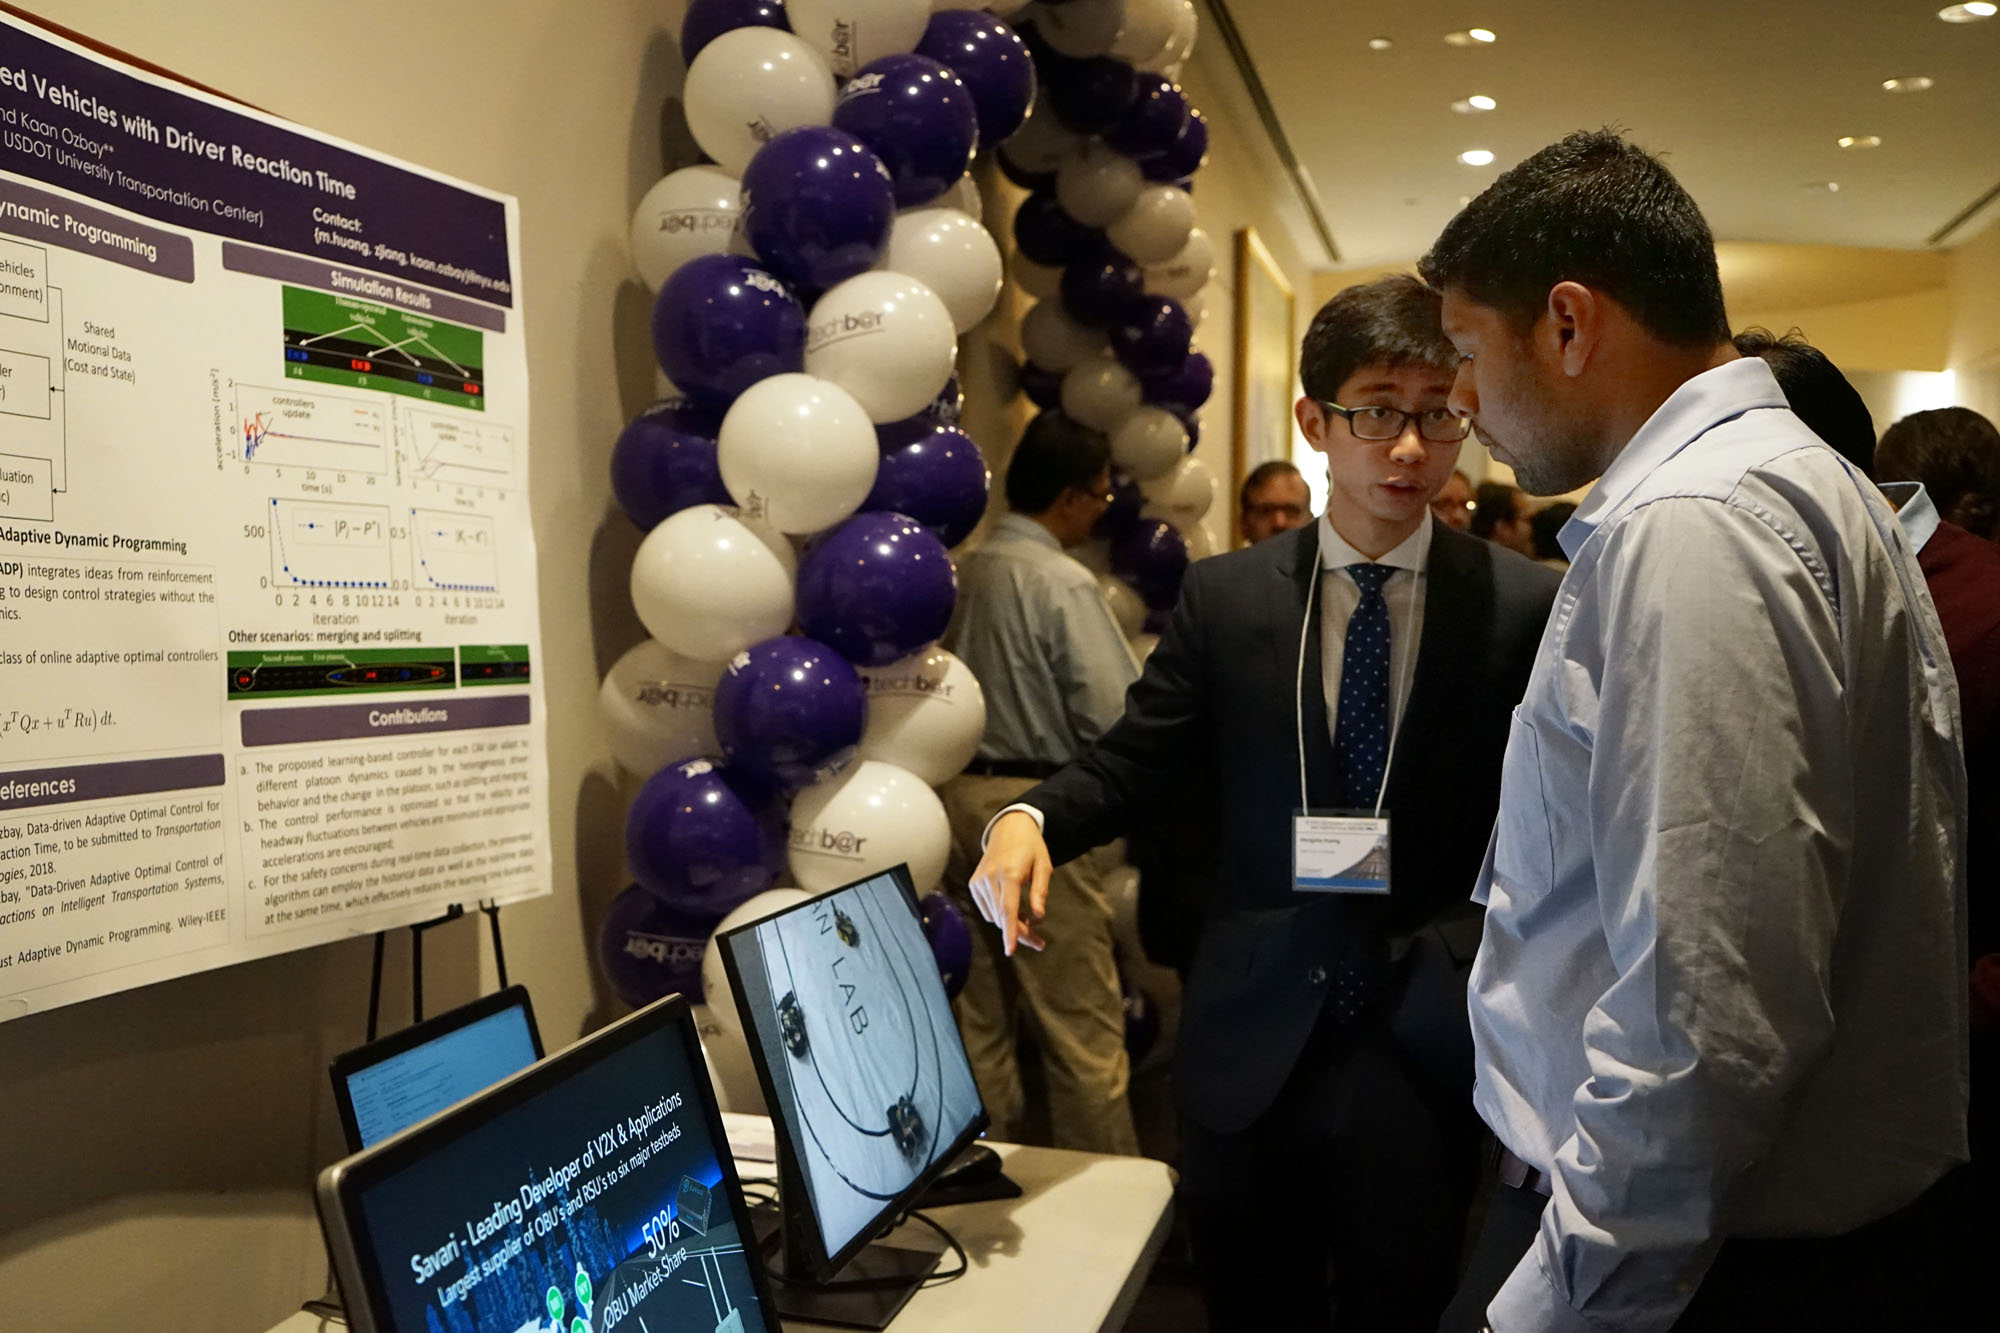 NYU Tandon PhD candidate Mengzhe Huang explains some of the recent research on display to a symposium attendee.